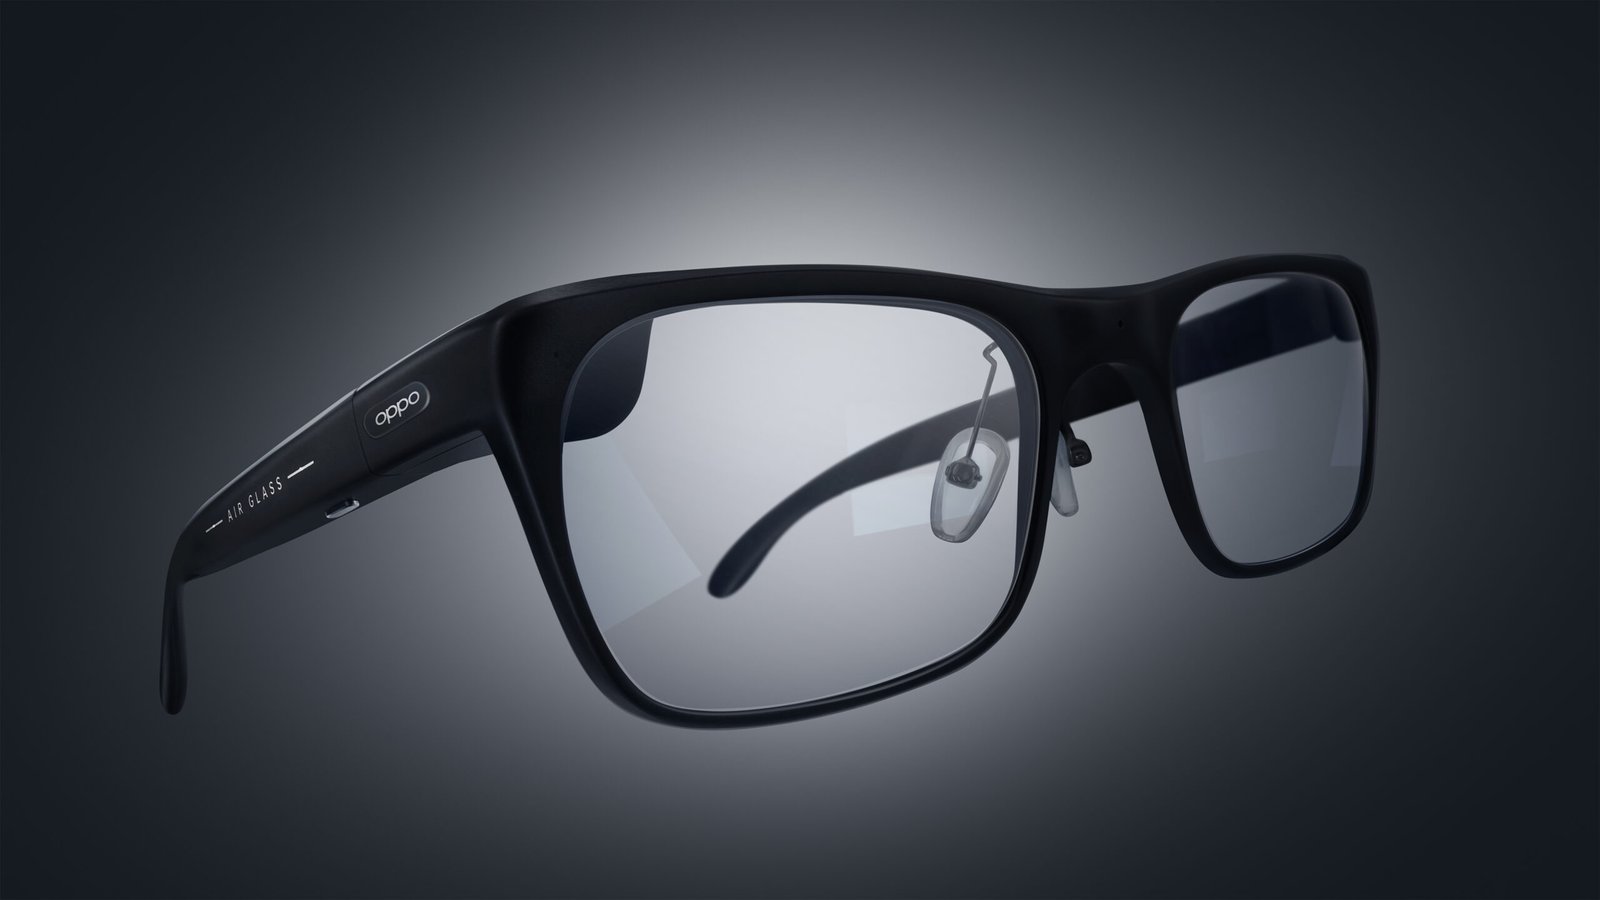 The OPPO Air Glass 3 is what Google Glass always wanted to be